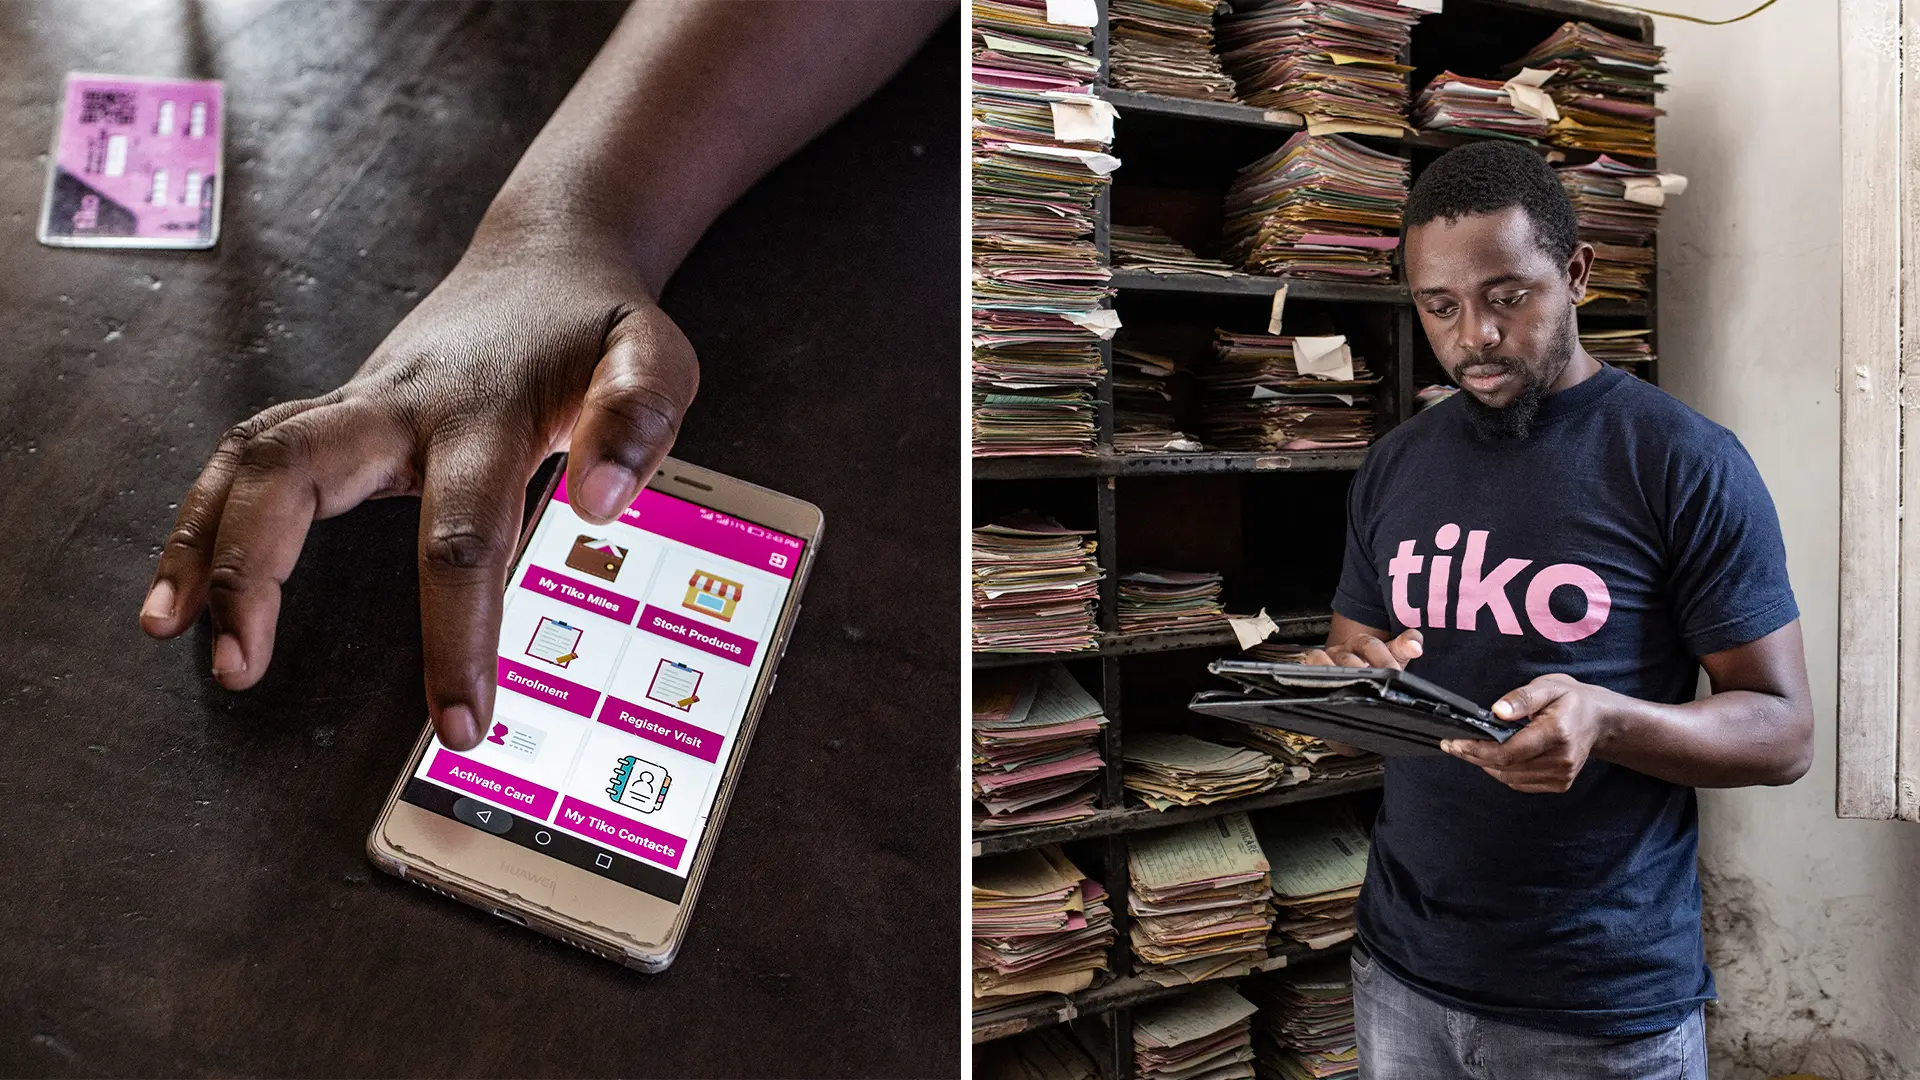 Left: Triggerise team member showing the Tiko app interface. Right: Dominic Ndawa, Mombasa County Lead for Tiko, checks information on his tablet where he stores data about the clients enrolled in the programme. This in stark contrast to the shelves behind him laden with handwritten notes about patients at the clinic.